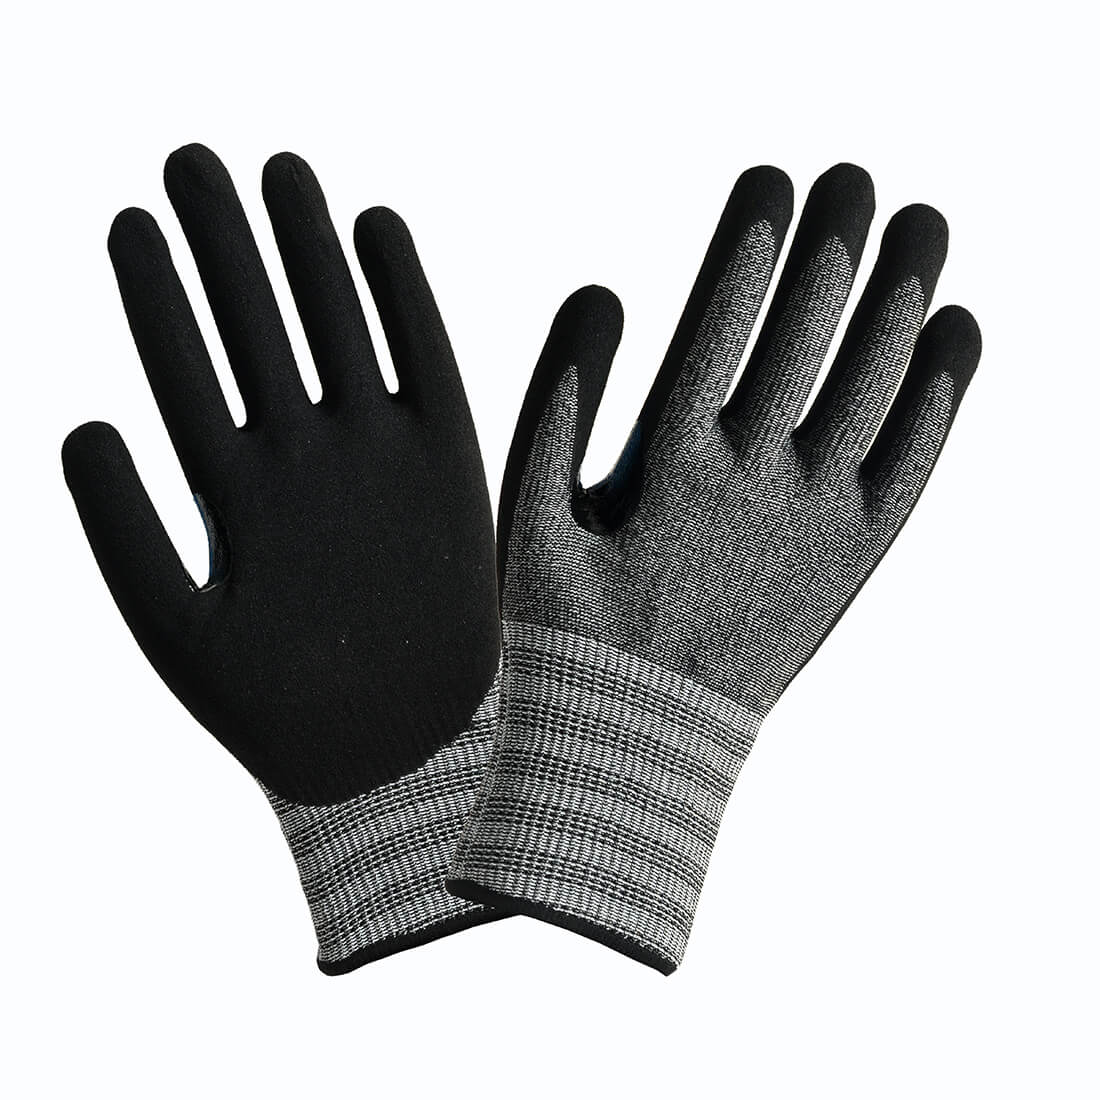 Cut resistance gloves,latex palm coated (9)